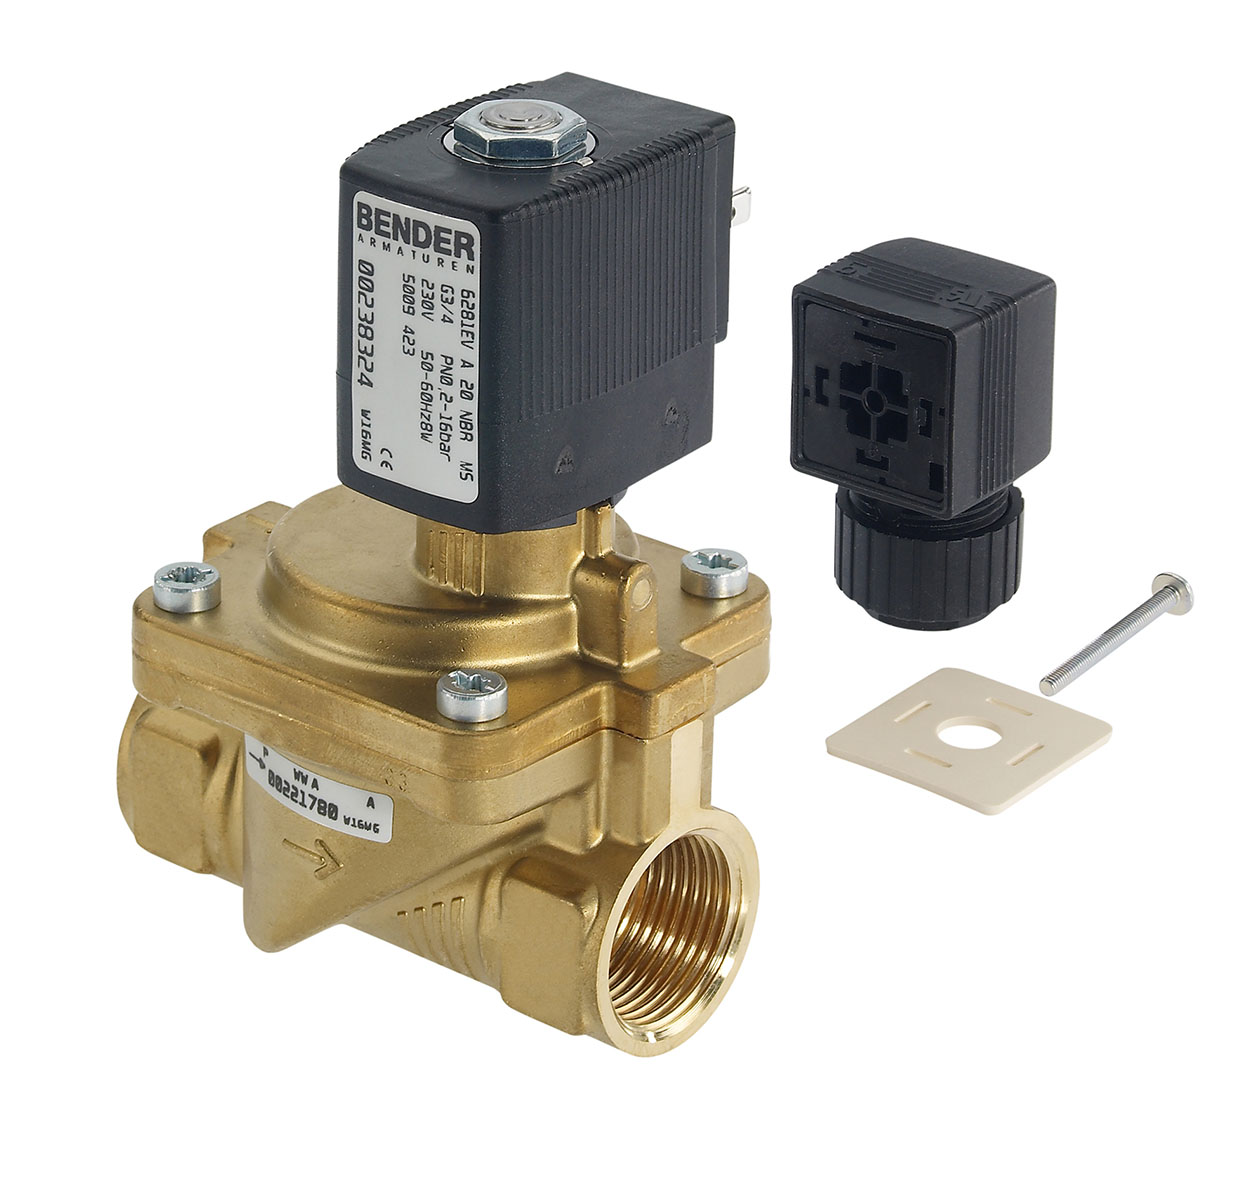 5009401 - 2/2 way solenoid valve normally closed for fluids and compressed air Type 3; female thread